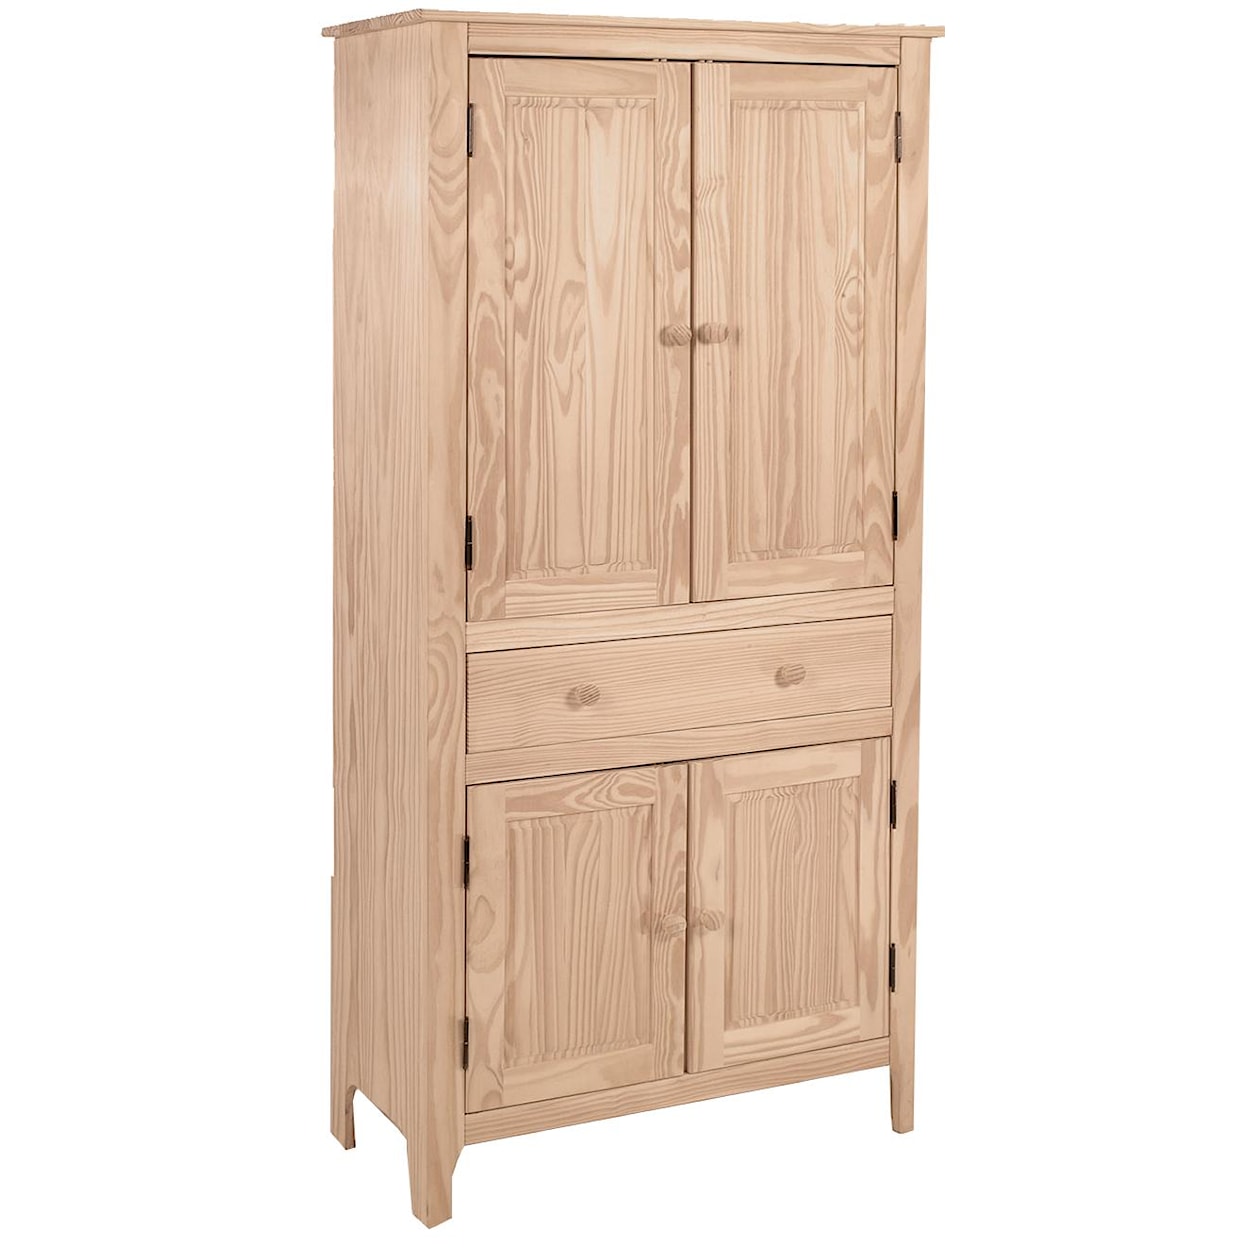 John Thomas SELECT Home Accents Country Cupboard